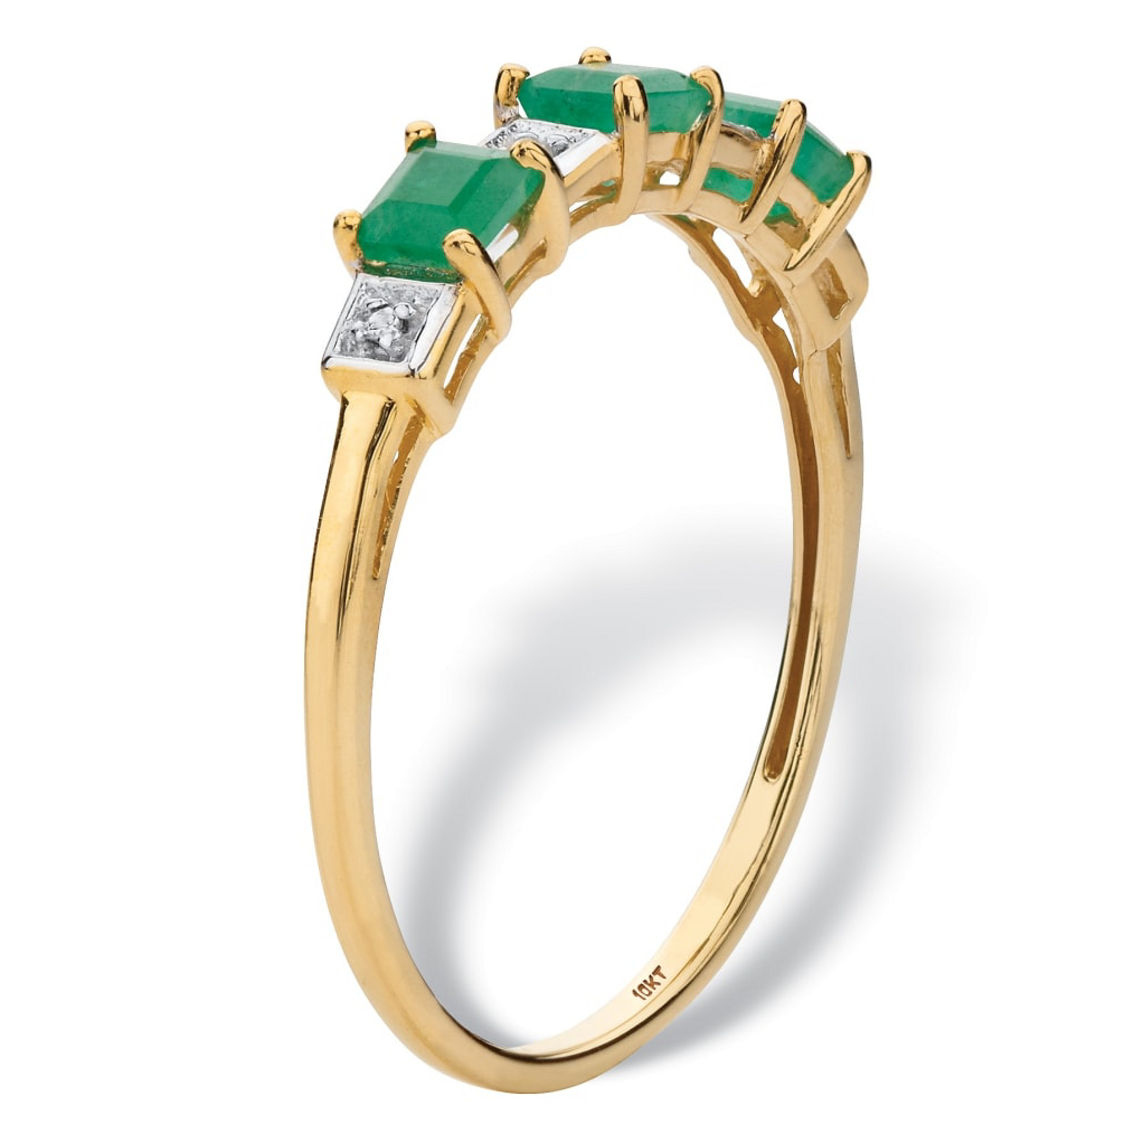 PalmBeach .67 Cttw. Princess-Cut Genuine Emerald Solid 10k Yellow Gold Ring - Image 2 of 5